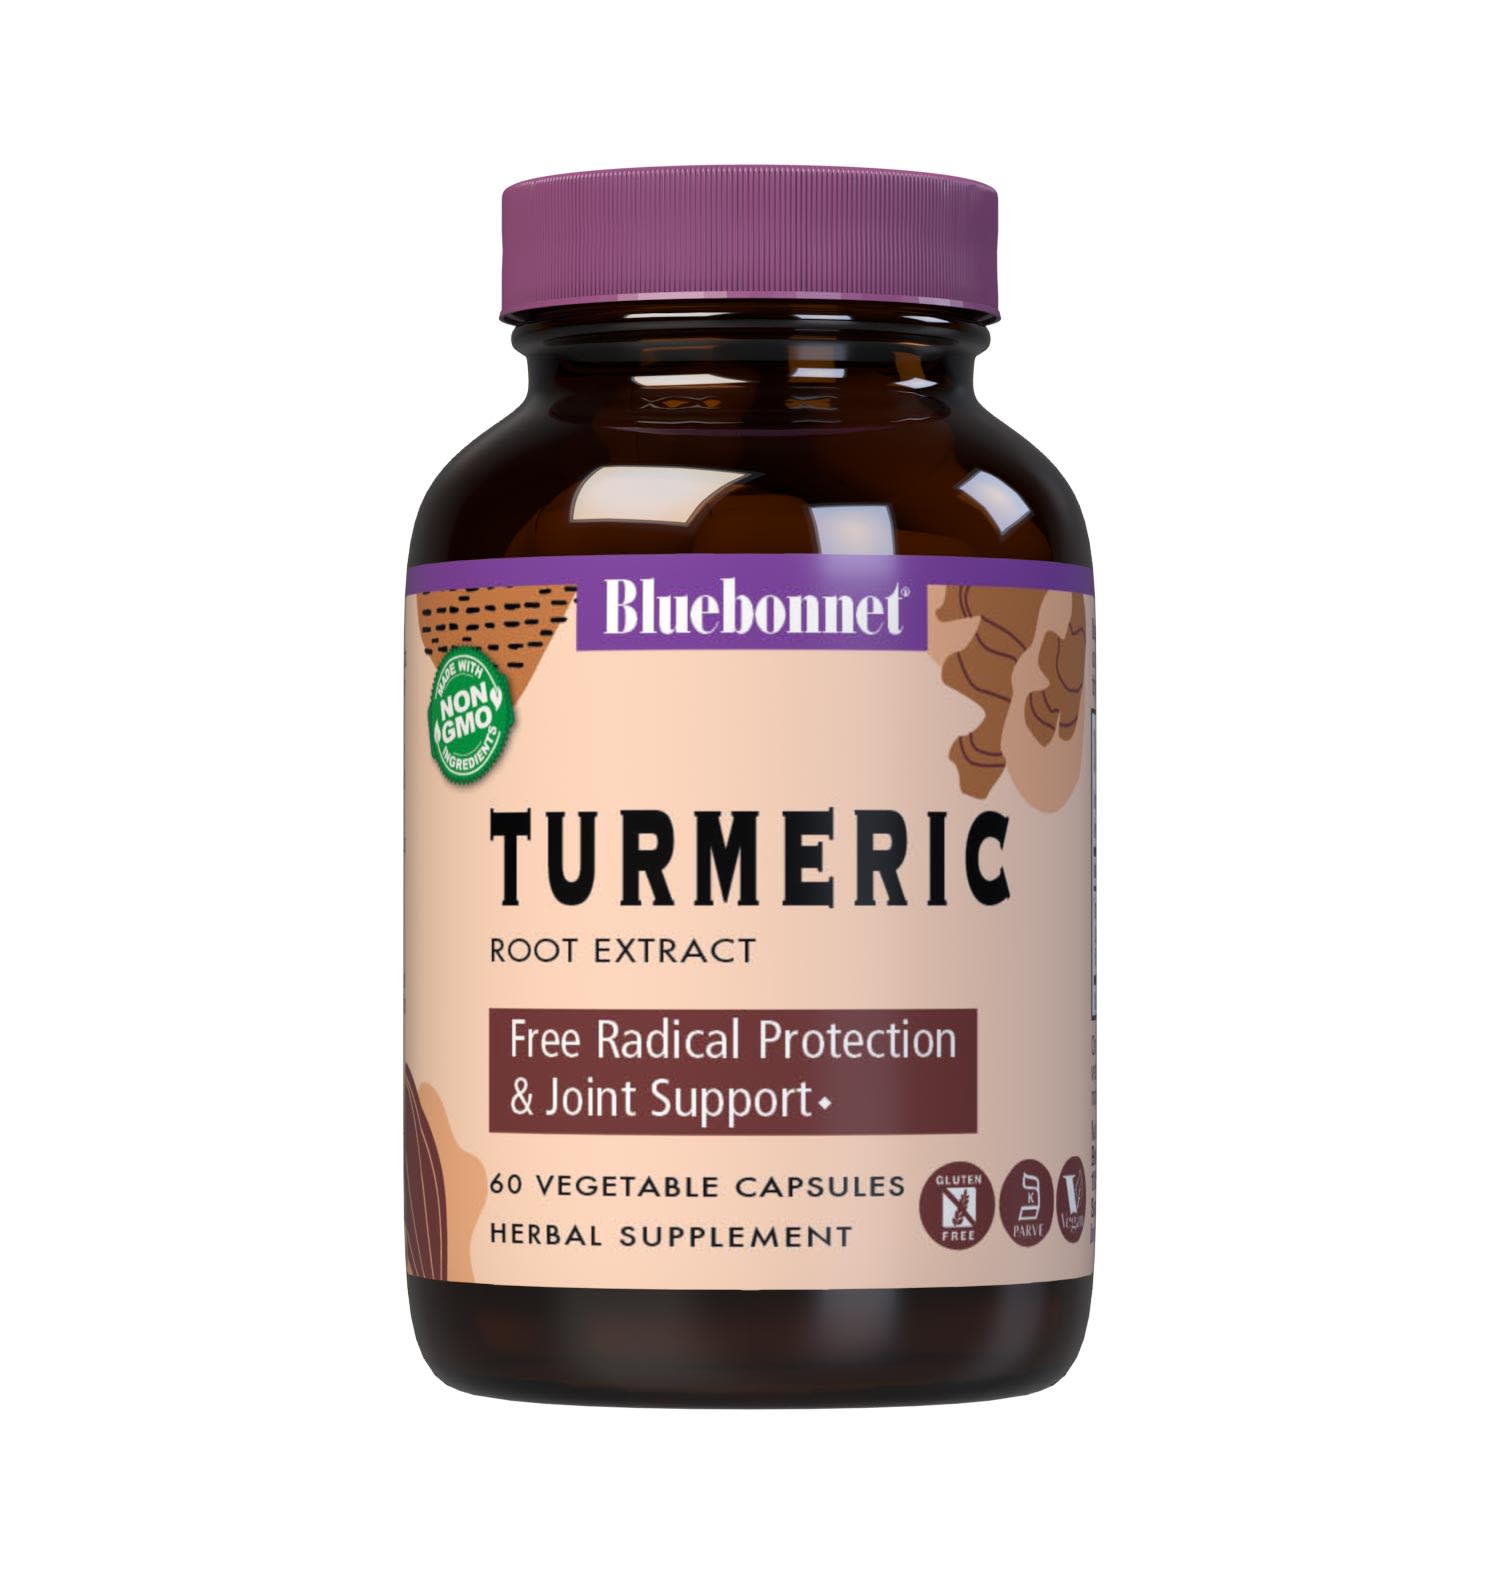 Bluebonnet’s Turmeric Root Extract 60 Capsules provide a standardized extract of total curcuminoids, the most researched active constituents found in turmeric. A clean and gentle water-based extraction method is employed to capture and preserve turmeric’s most valuable components. #size_60 count